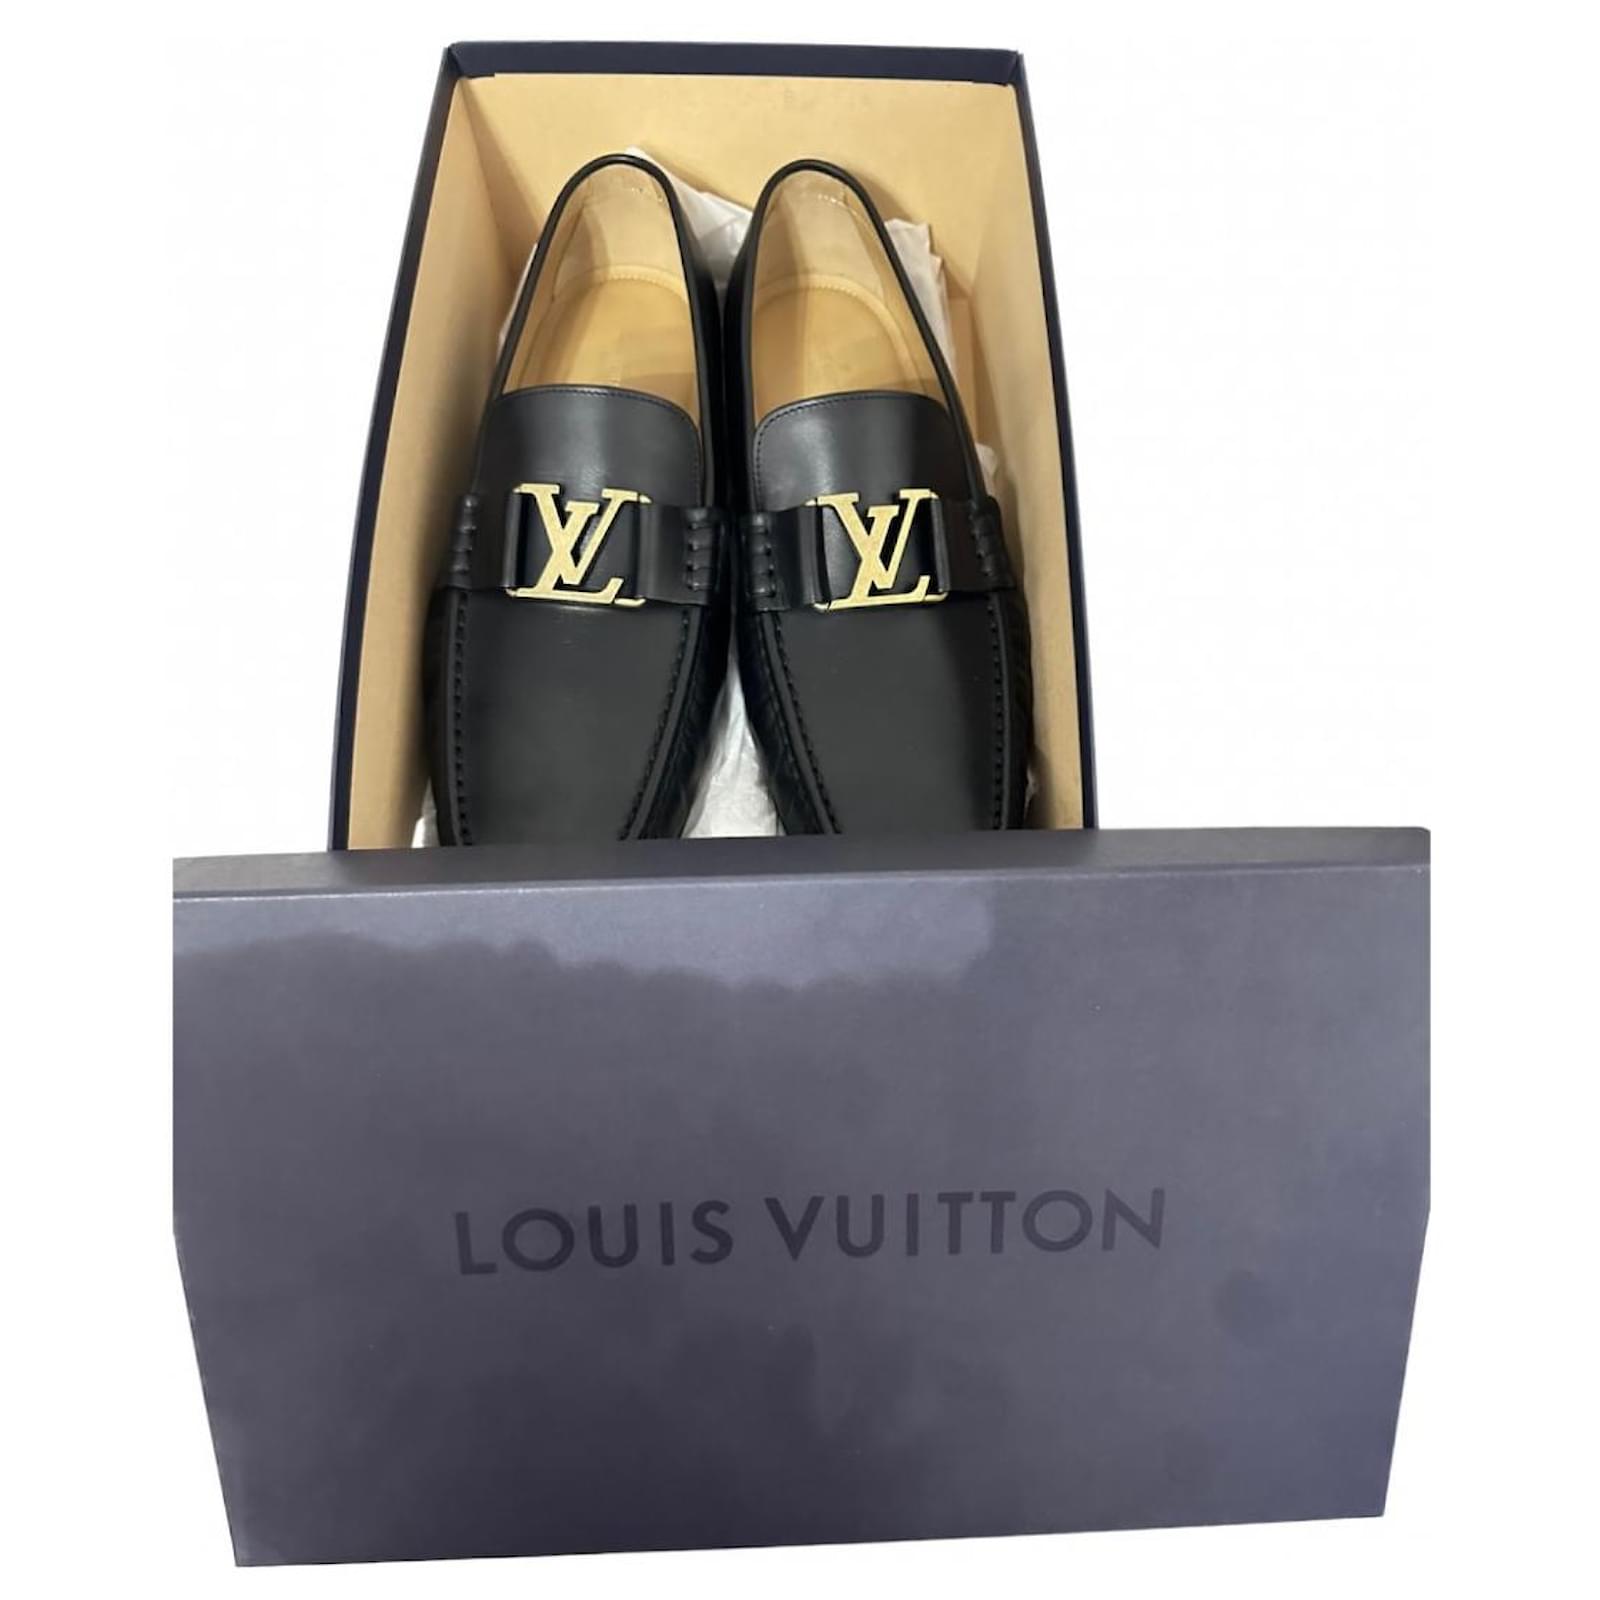 New in Box Louis Vuitton Gold & Silver LV Logo Black Leather